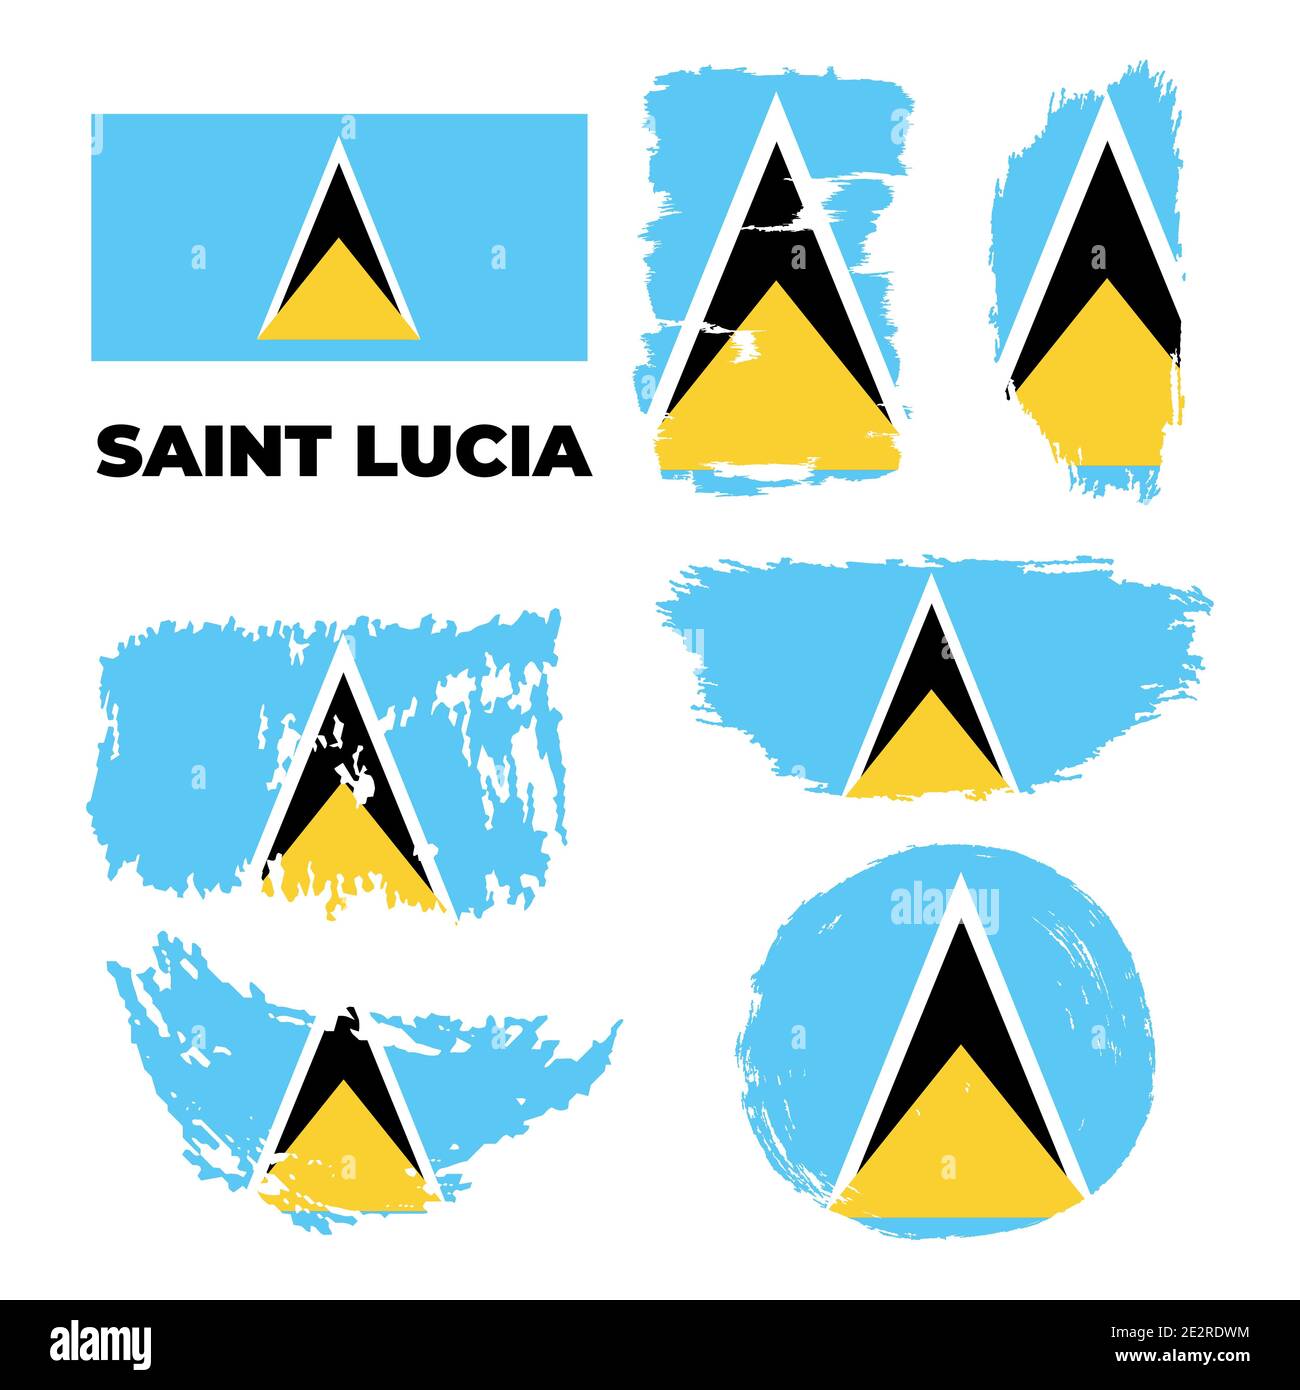 Grunge style brush painted Saint Lucia country flag illustration  Stock Vector